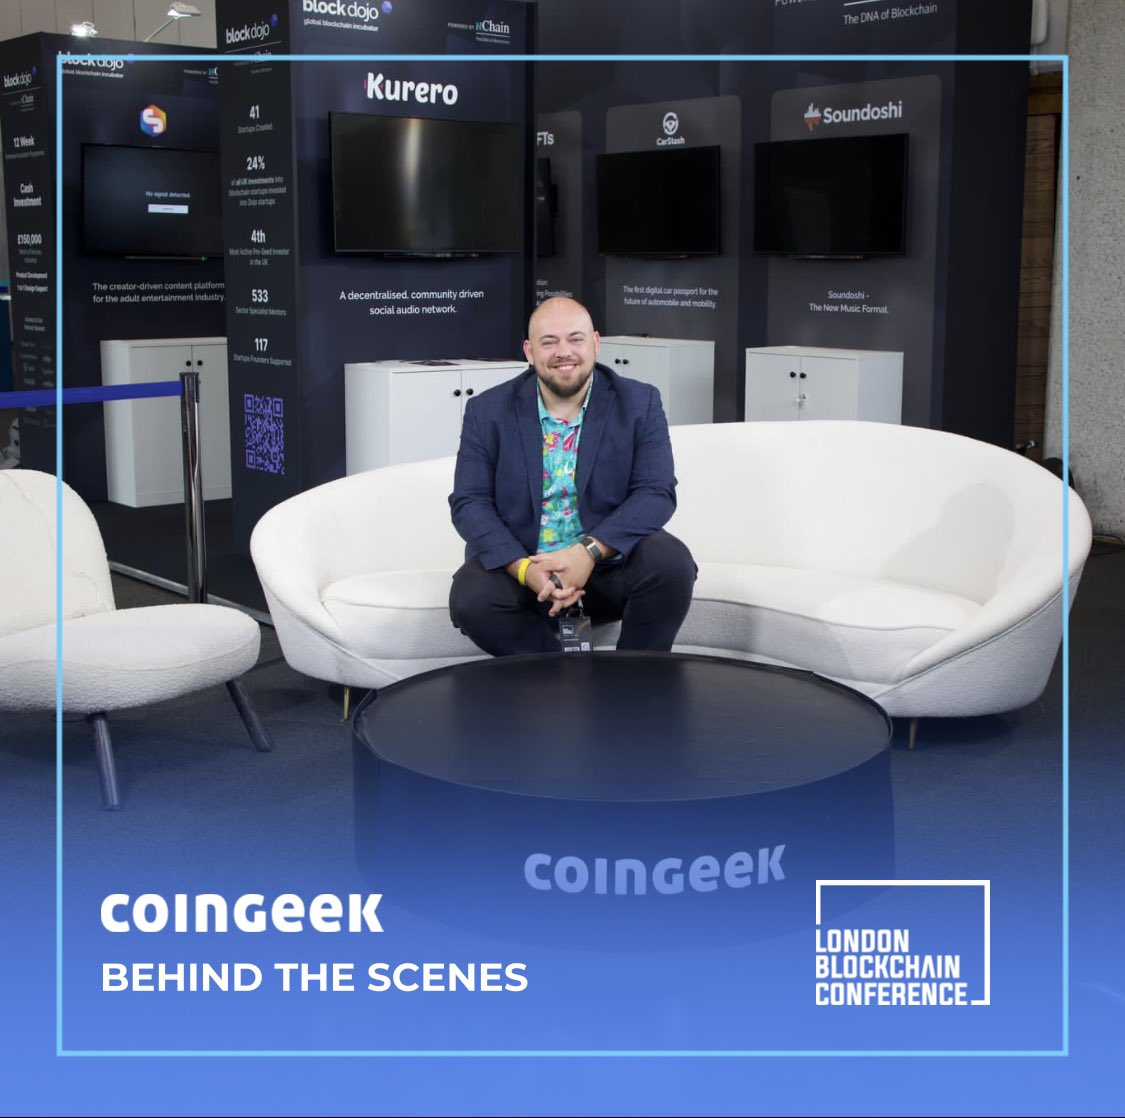 Join us for #CGTV coming up in just a few minutes! We have a very exciting guest! 

Head over to coingeek.com and enjoy the show! #LDNBlockchain23